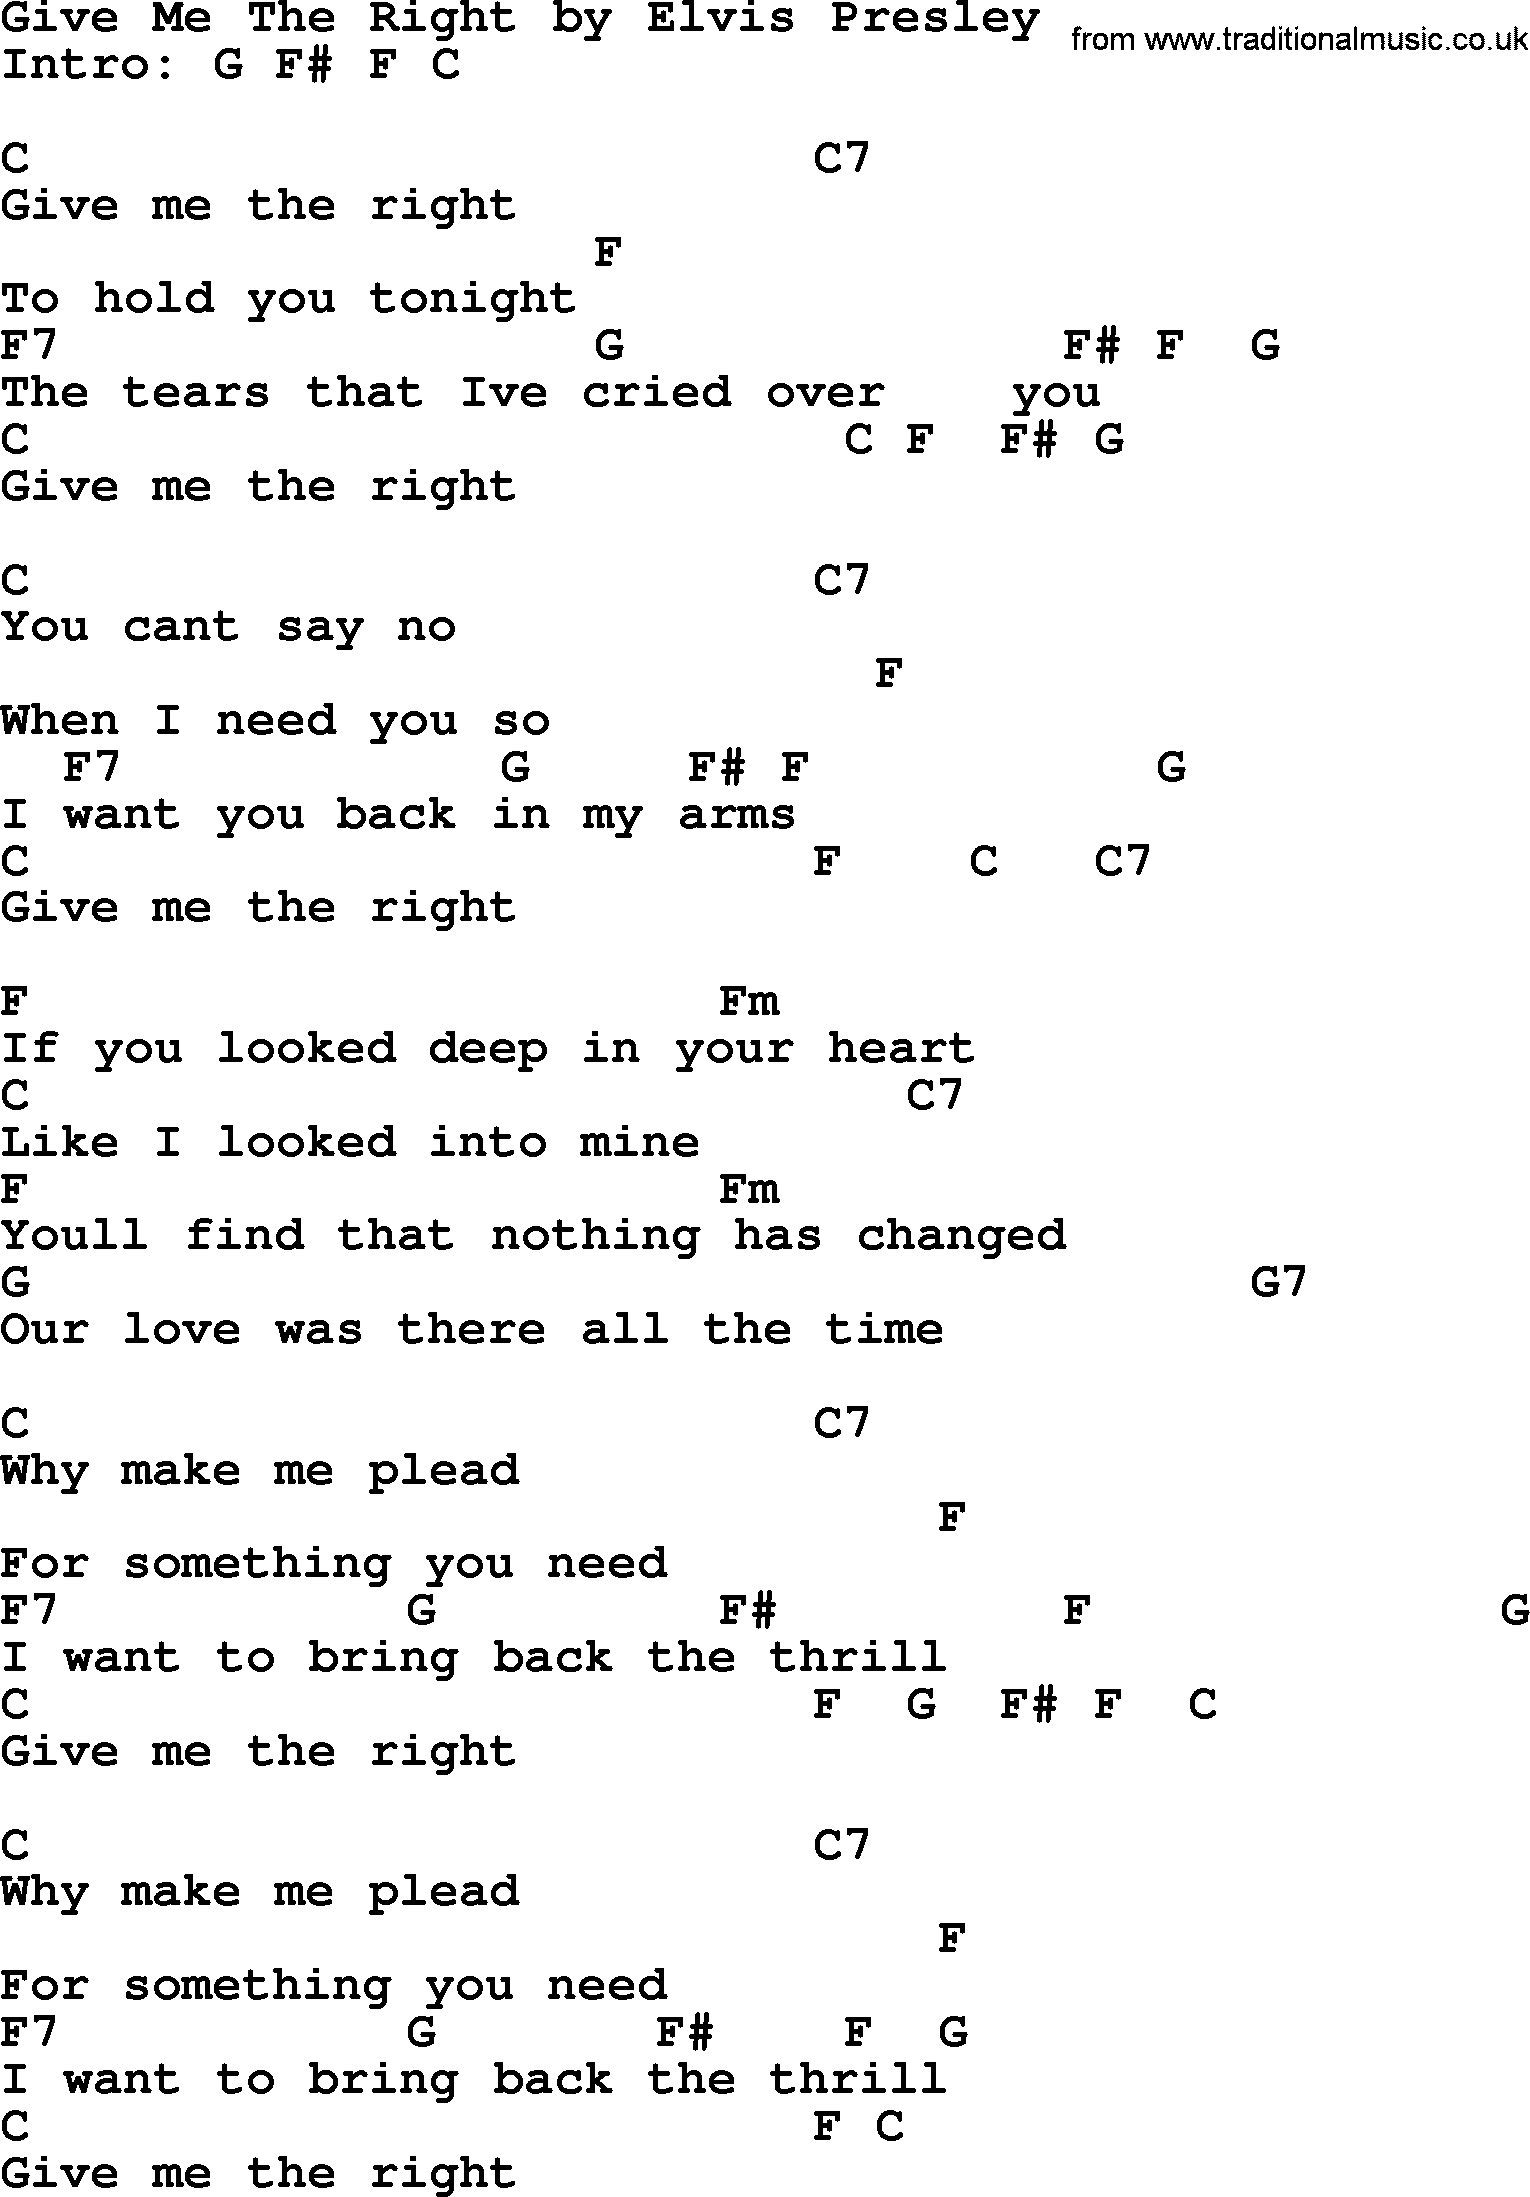 Elvis Presley song: Give Me The Right, lyrics and chords